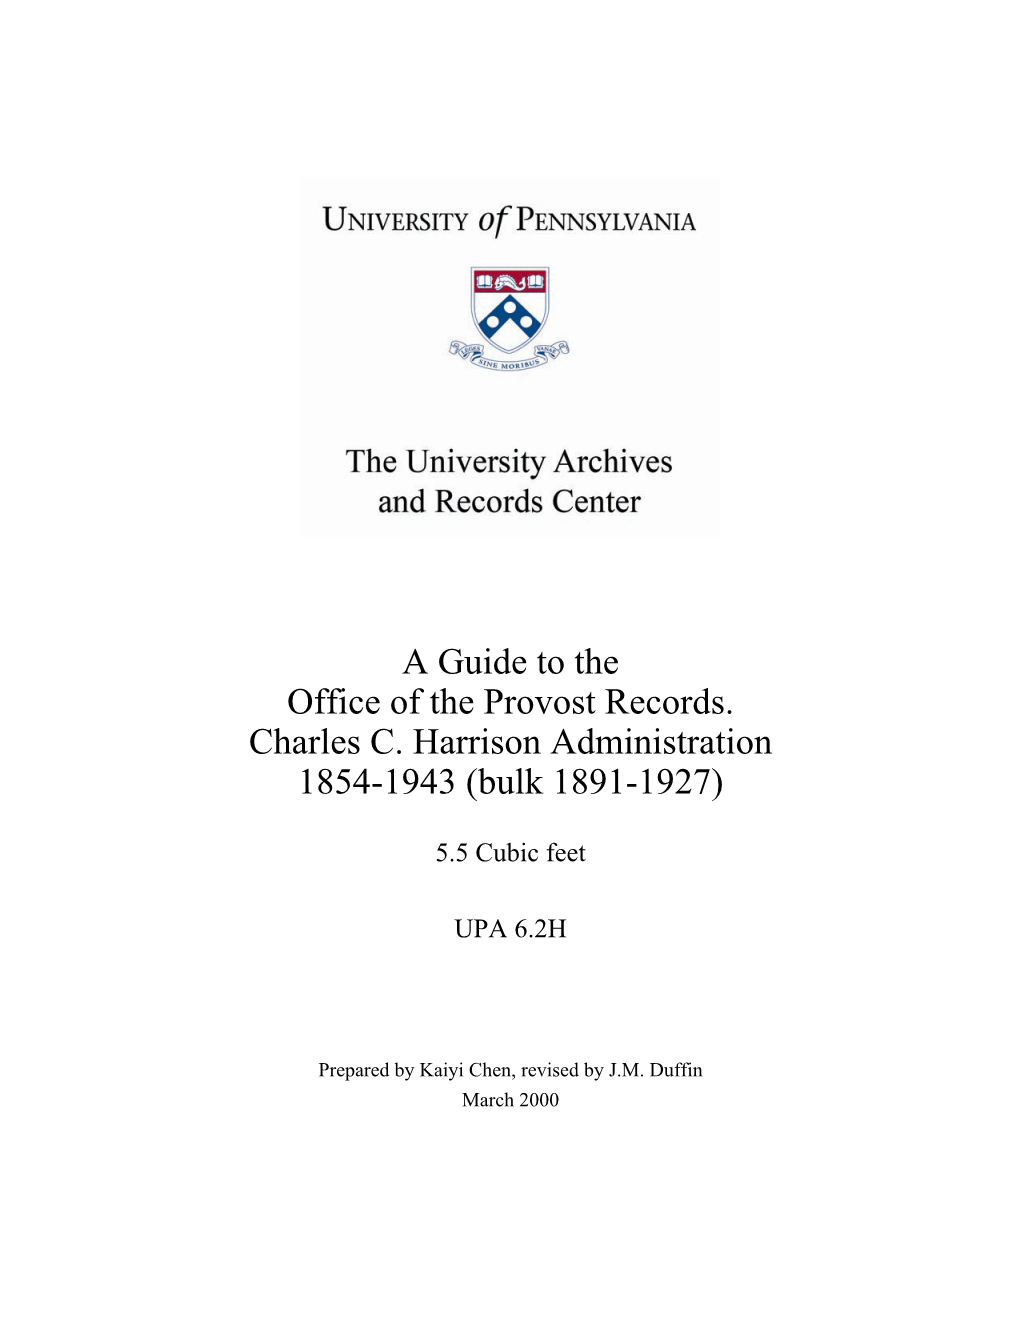 Guide, Office of the Provost Records. Charles C. Harrison Administration